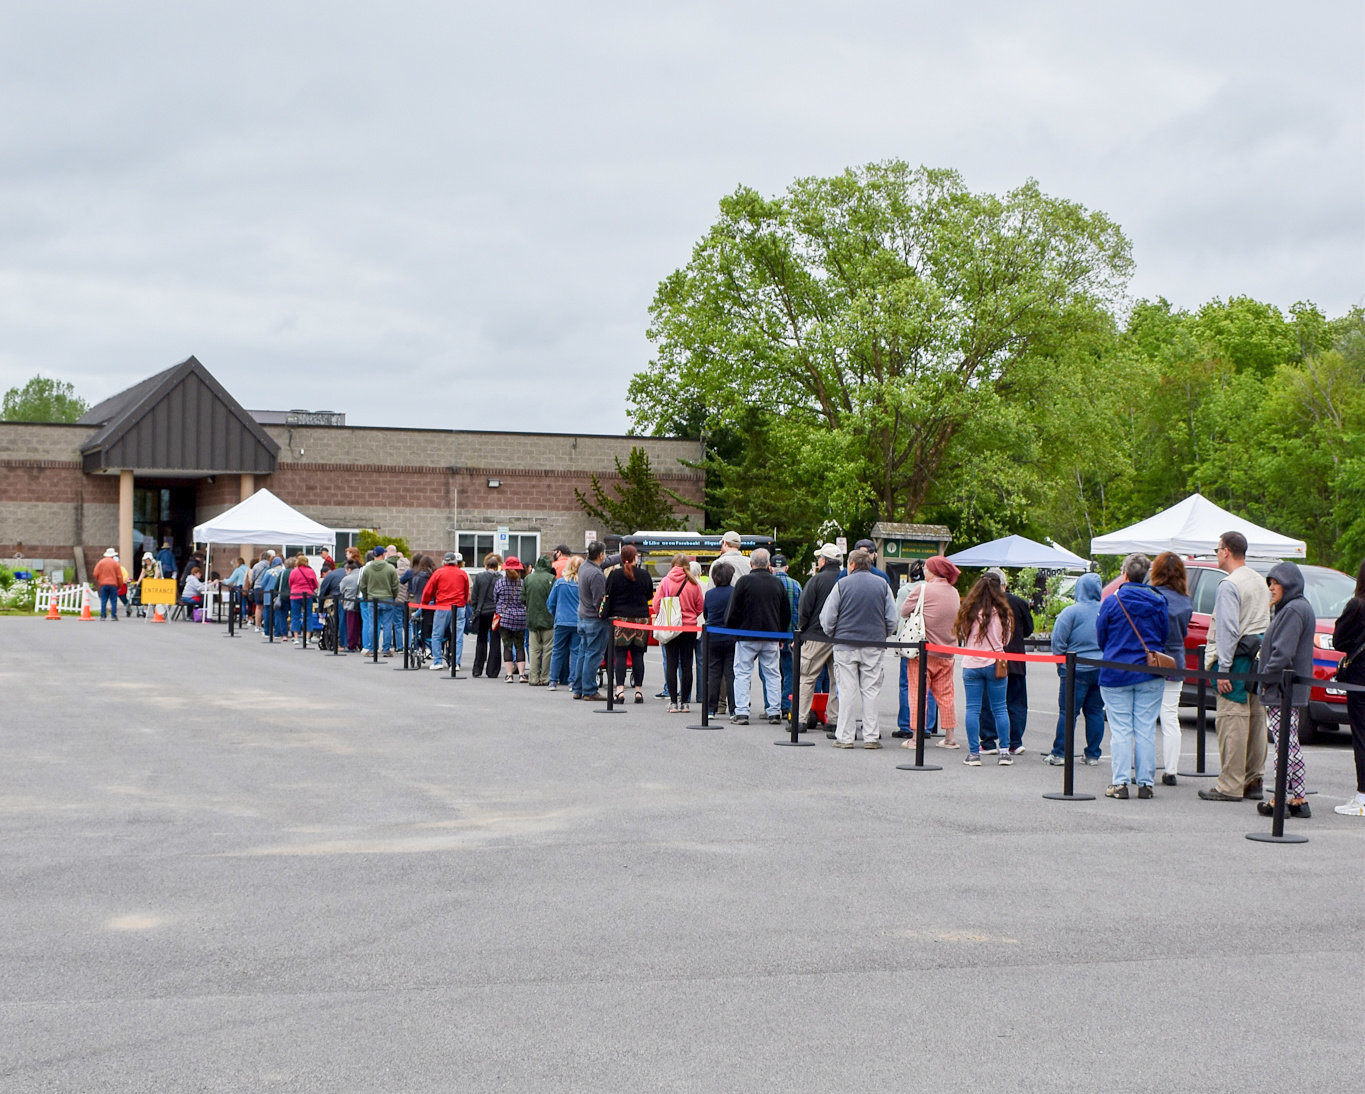 Cold temperatures and cloudy skies didnât keep attendees away from the Herb and Flower Festival on Saturday, June 18. Almost 800 people attended the event hosted at the Oneida County Farm & Home Center in Oriska